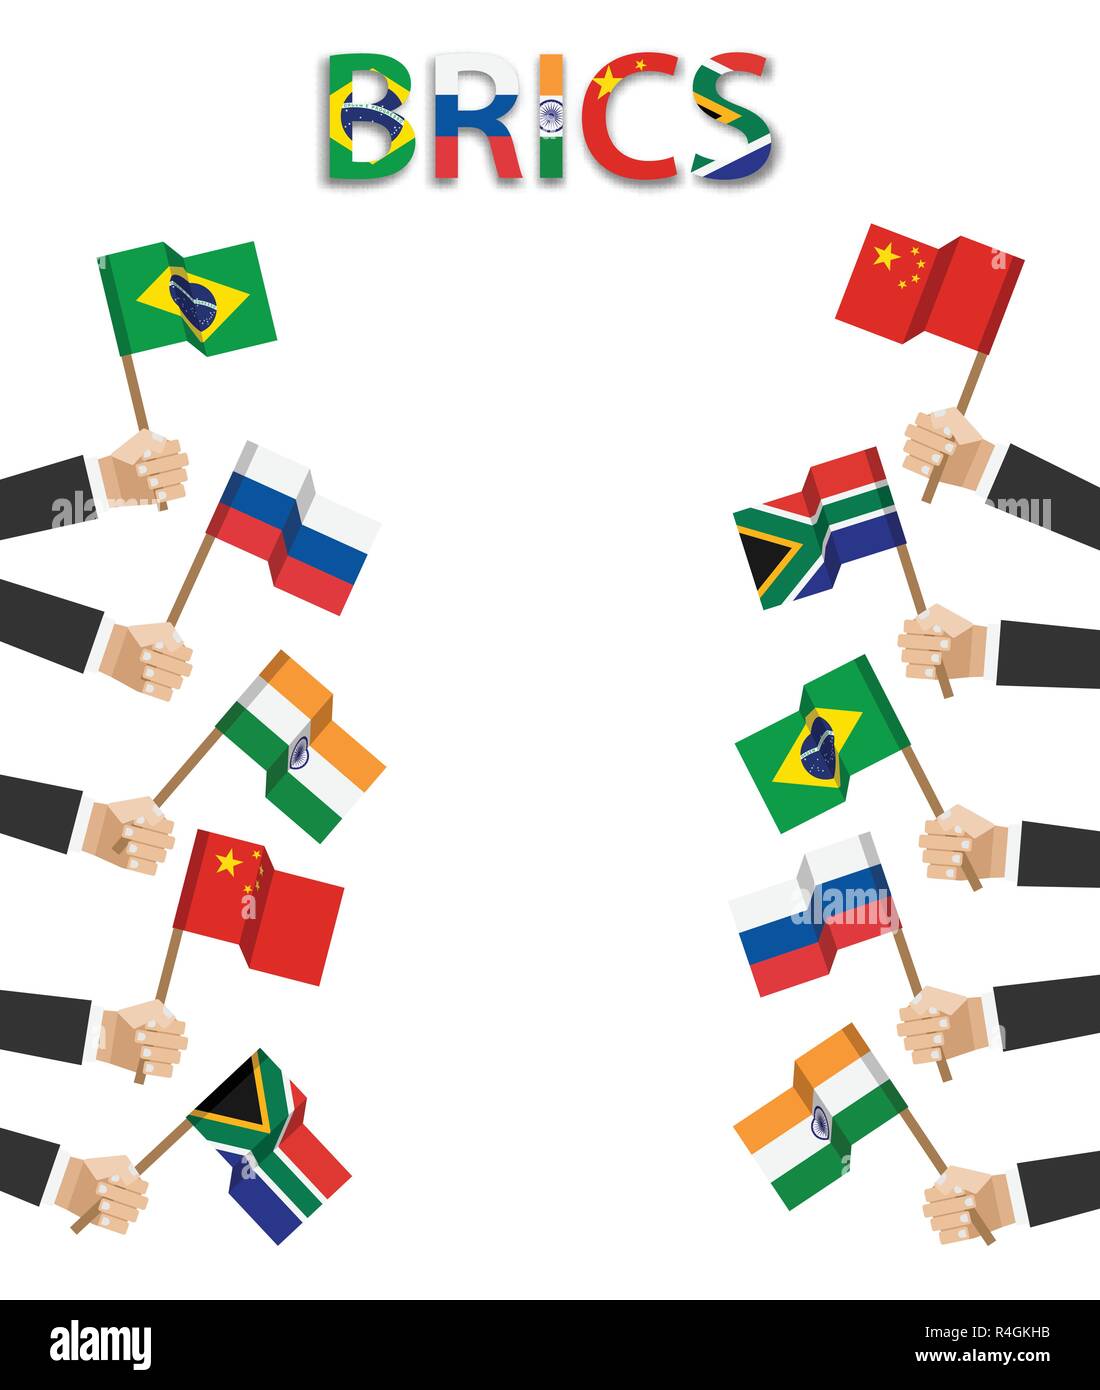 BRICS . association of 5 countries ( brazil . russia . india . china . south africa ) . Businessman hand hold and wave flag at border side of edge ima Stock Vector